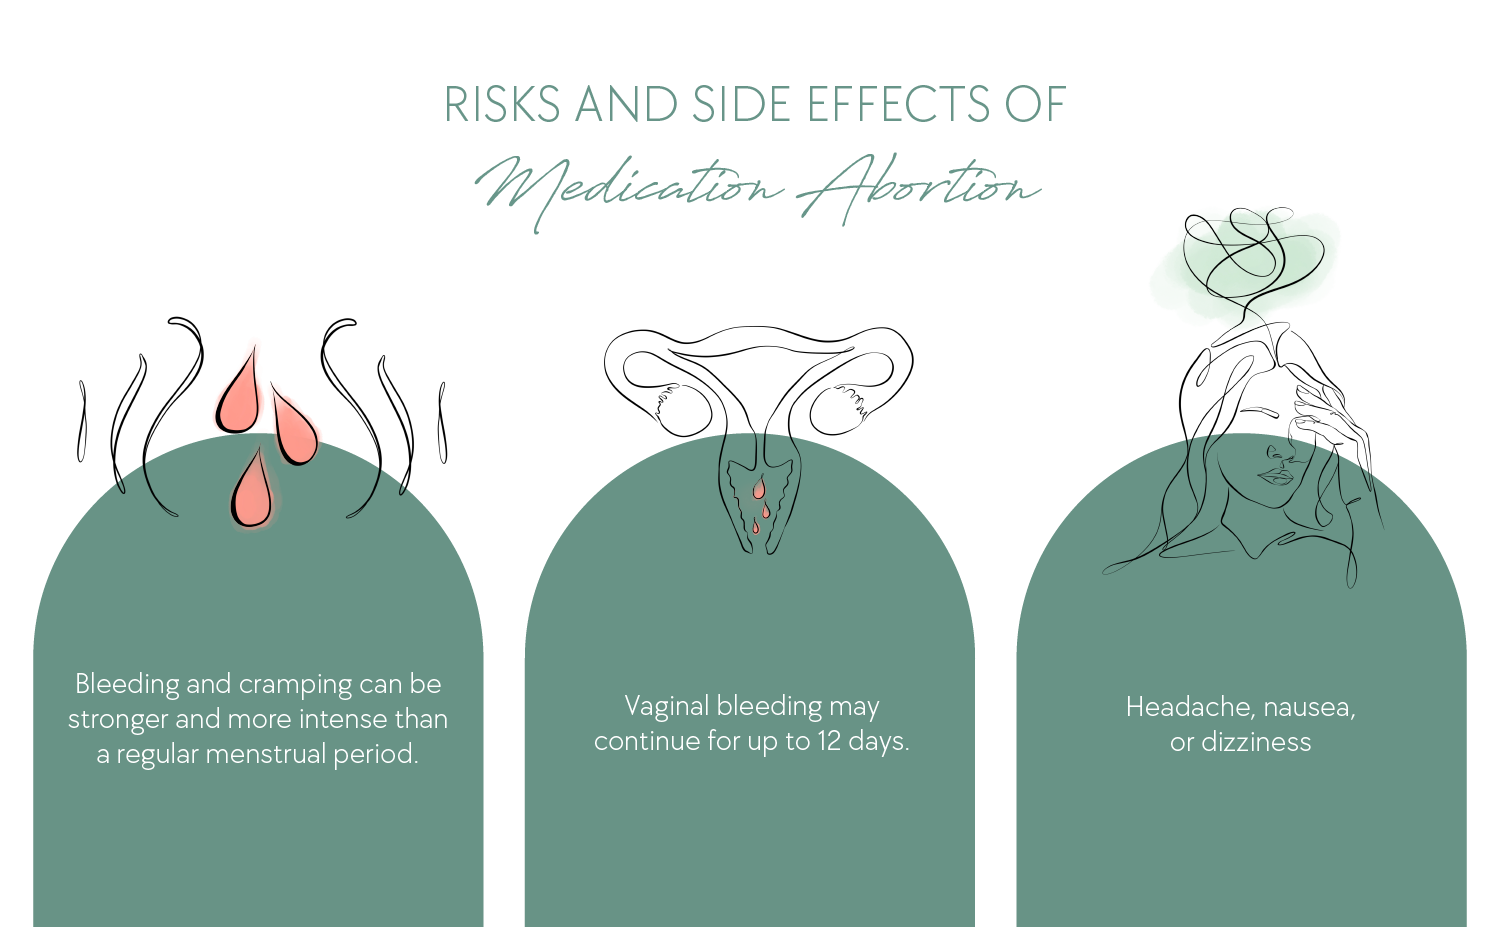 Risks and side effects of Medical Abortion